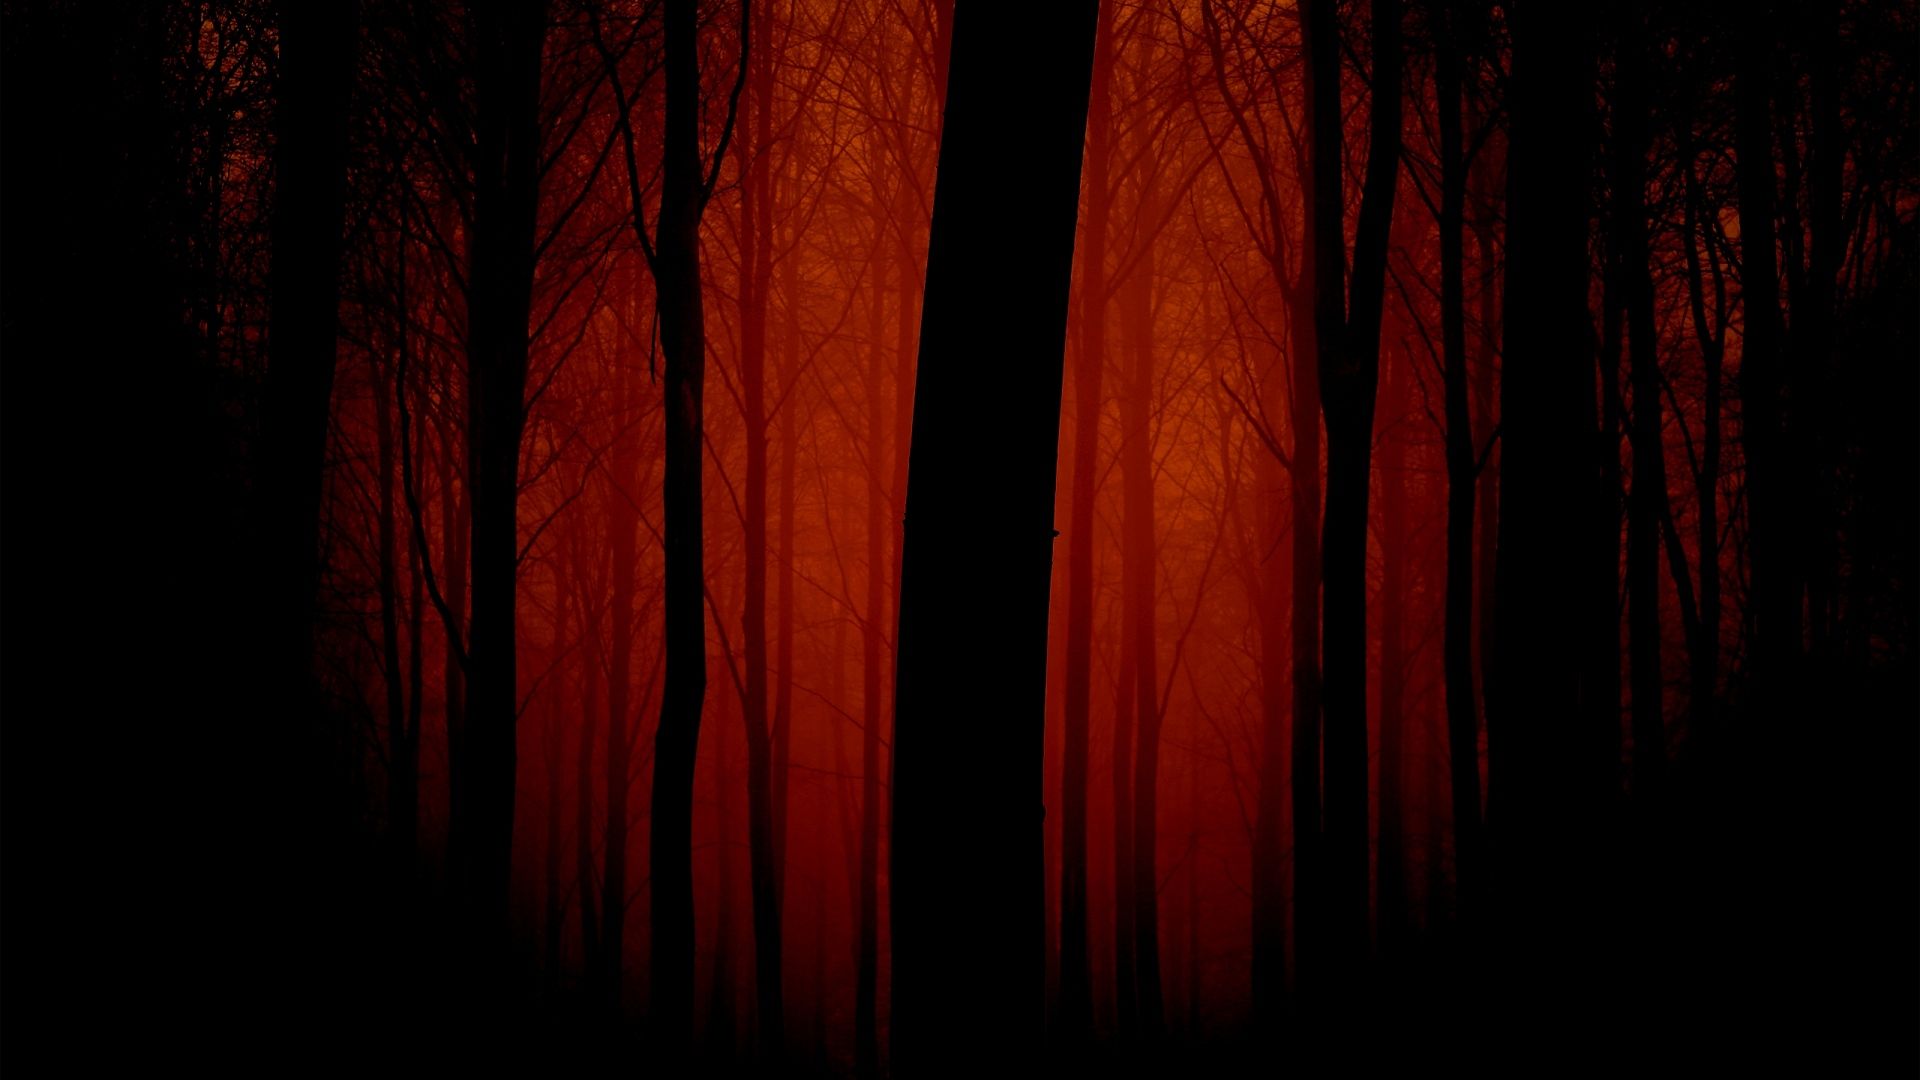 Red Scary Forest Digital Art Wallpaper Background 64315 1920x1080px